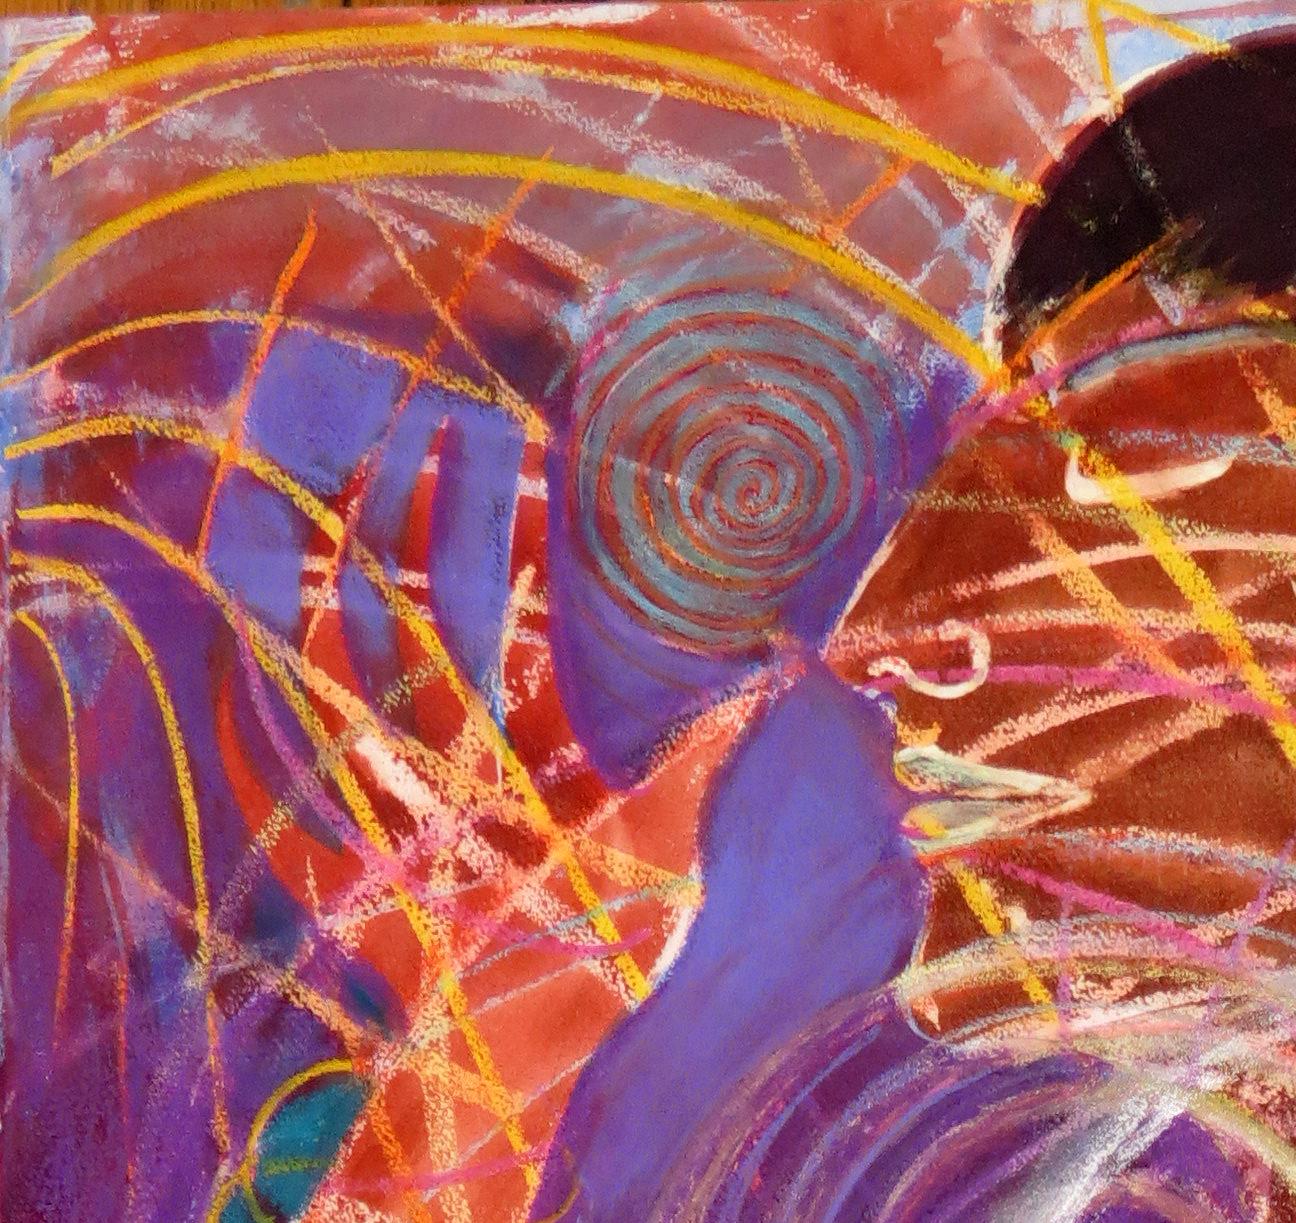 Sweet Energy, colorful red swirling abstract mystical mixed media - Painting by Janet Morgan